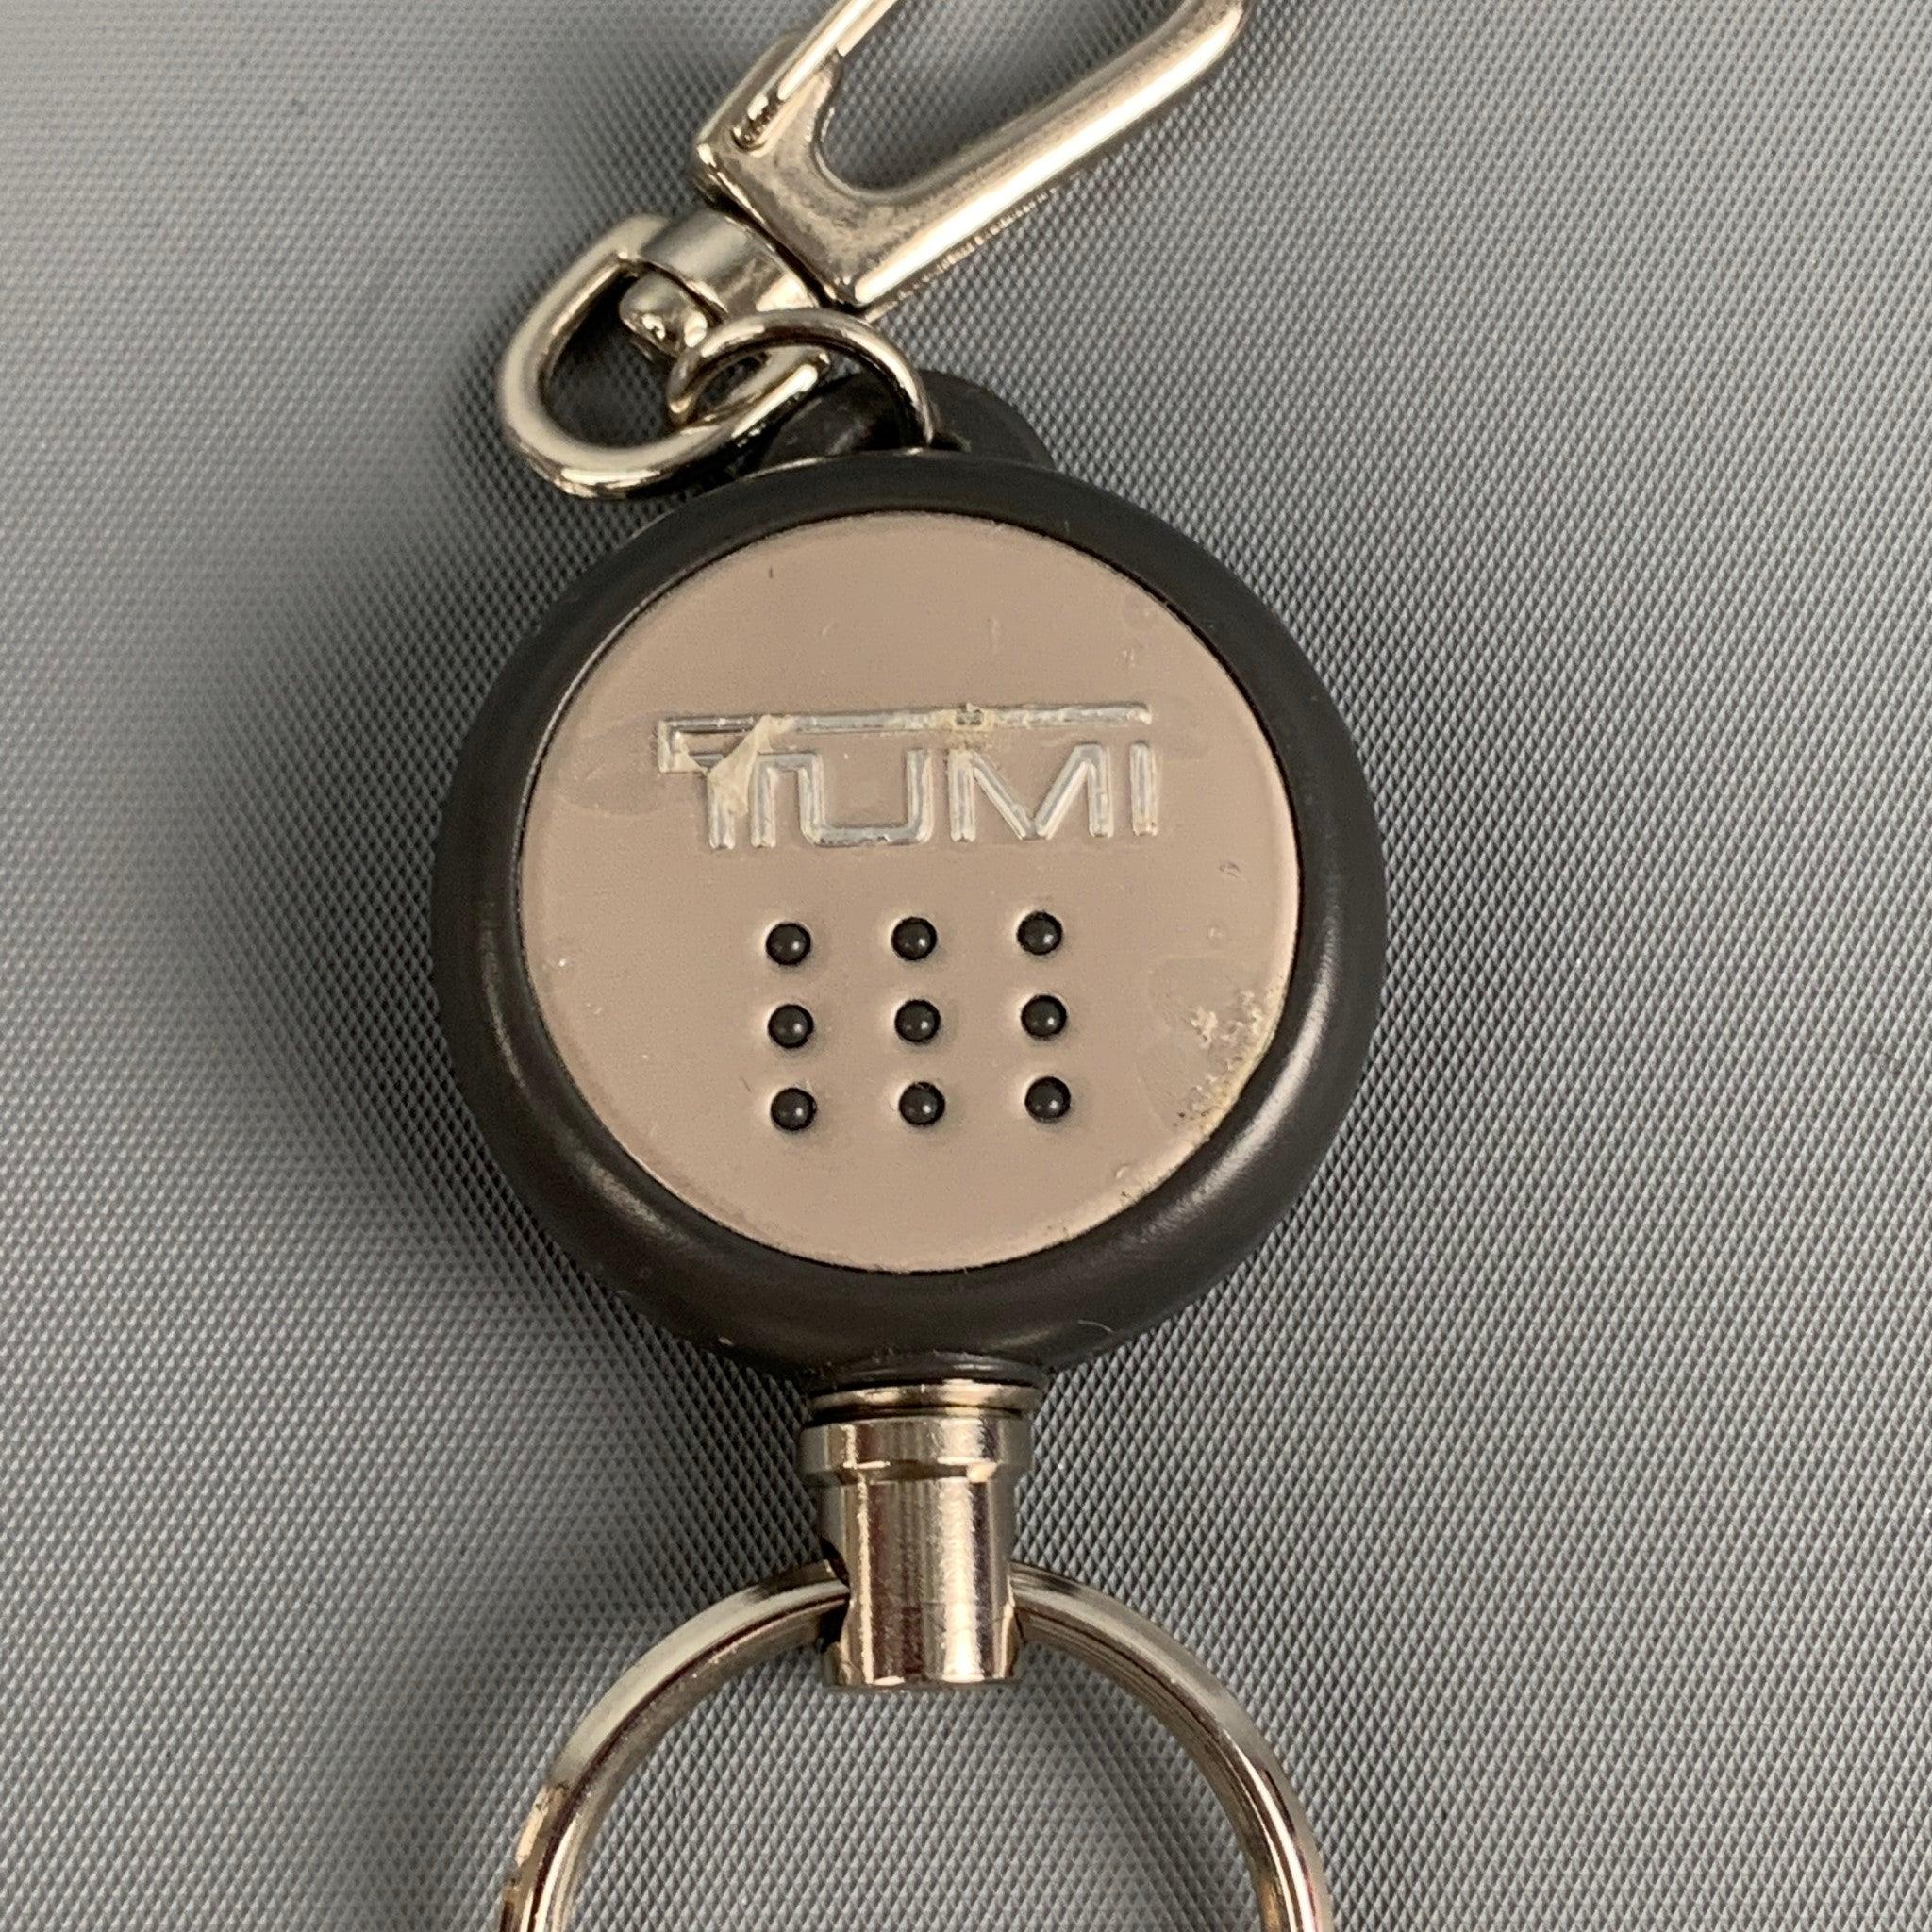 TUMI key ring comes in a silver metal featuring a clasp closure.
Good Pre-Owned Condition. Light wear. As-Is.  

Measurements: 
  Width: 1.25 inches  

  
  
 
Reference: 118838
Category: Bags & Leather Goods
More Details
    
Brand:  TUMI
Color: 